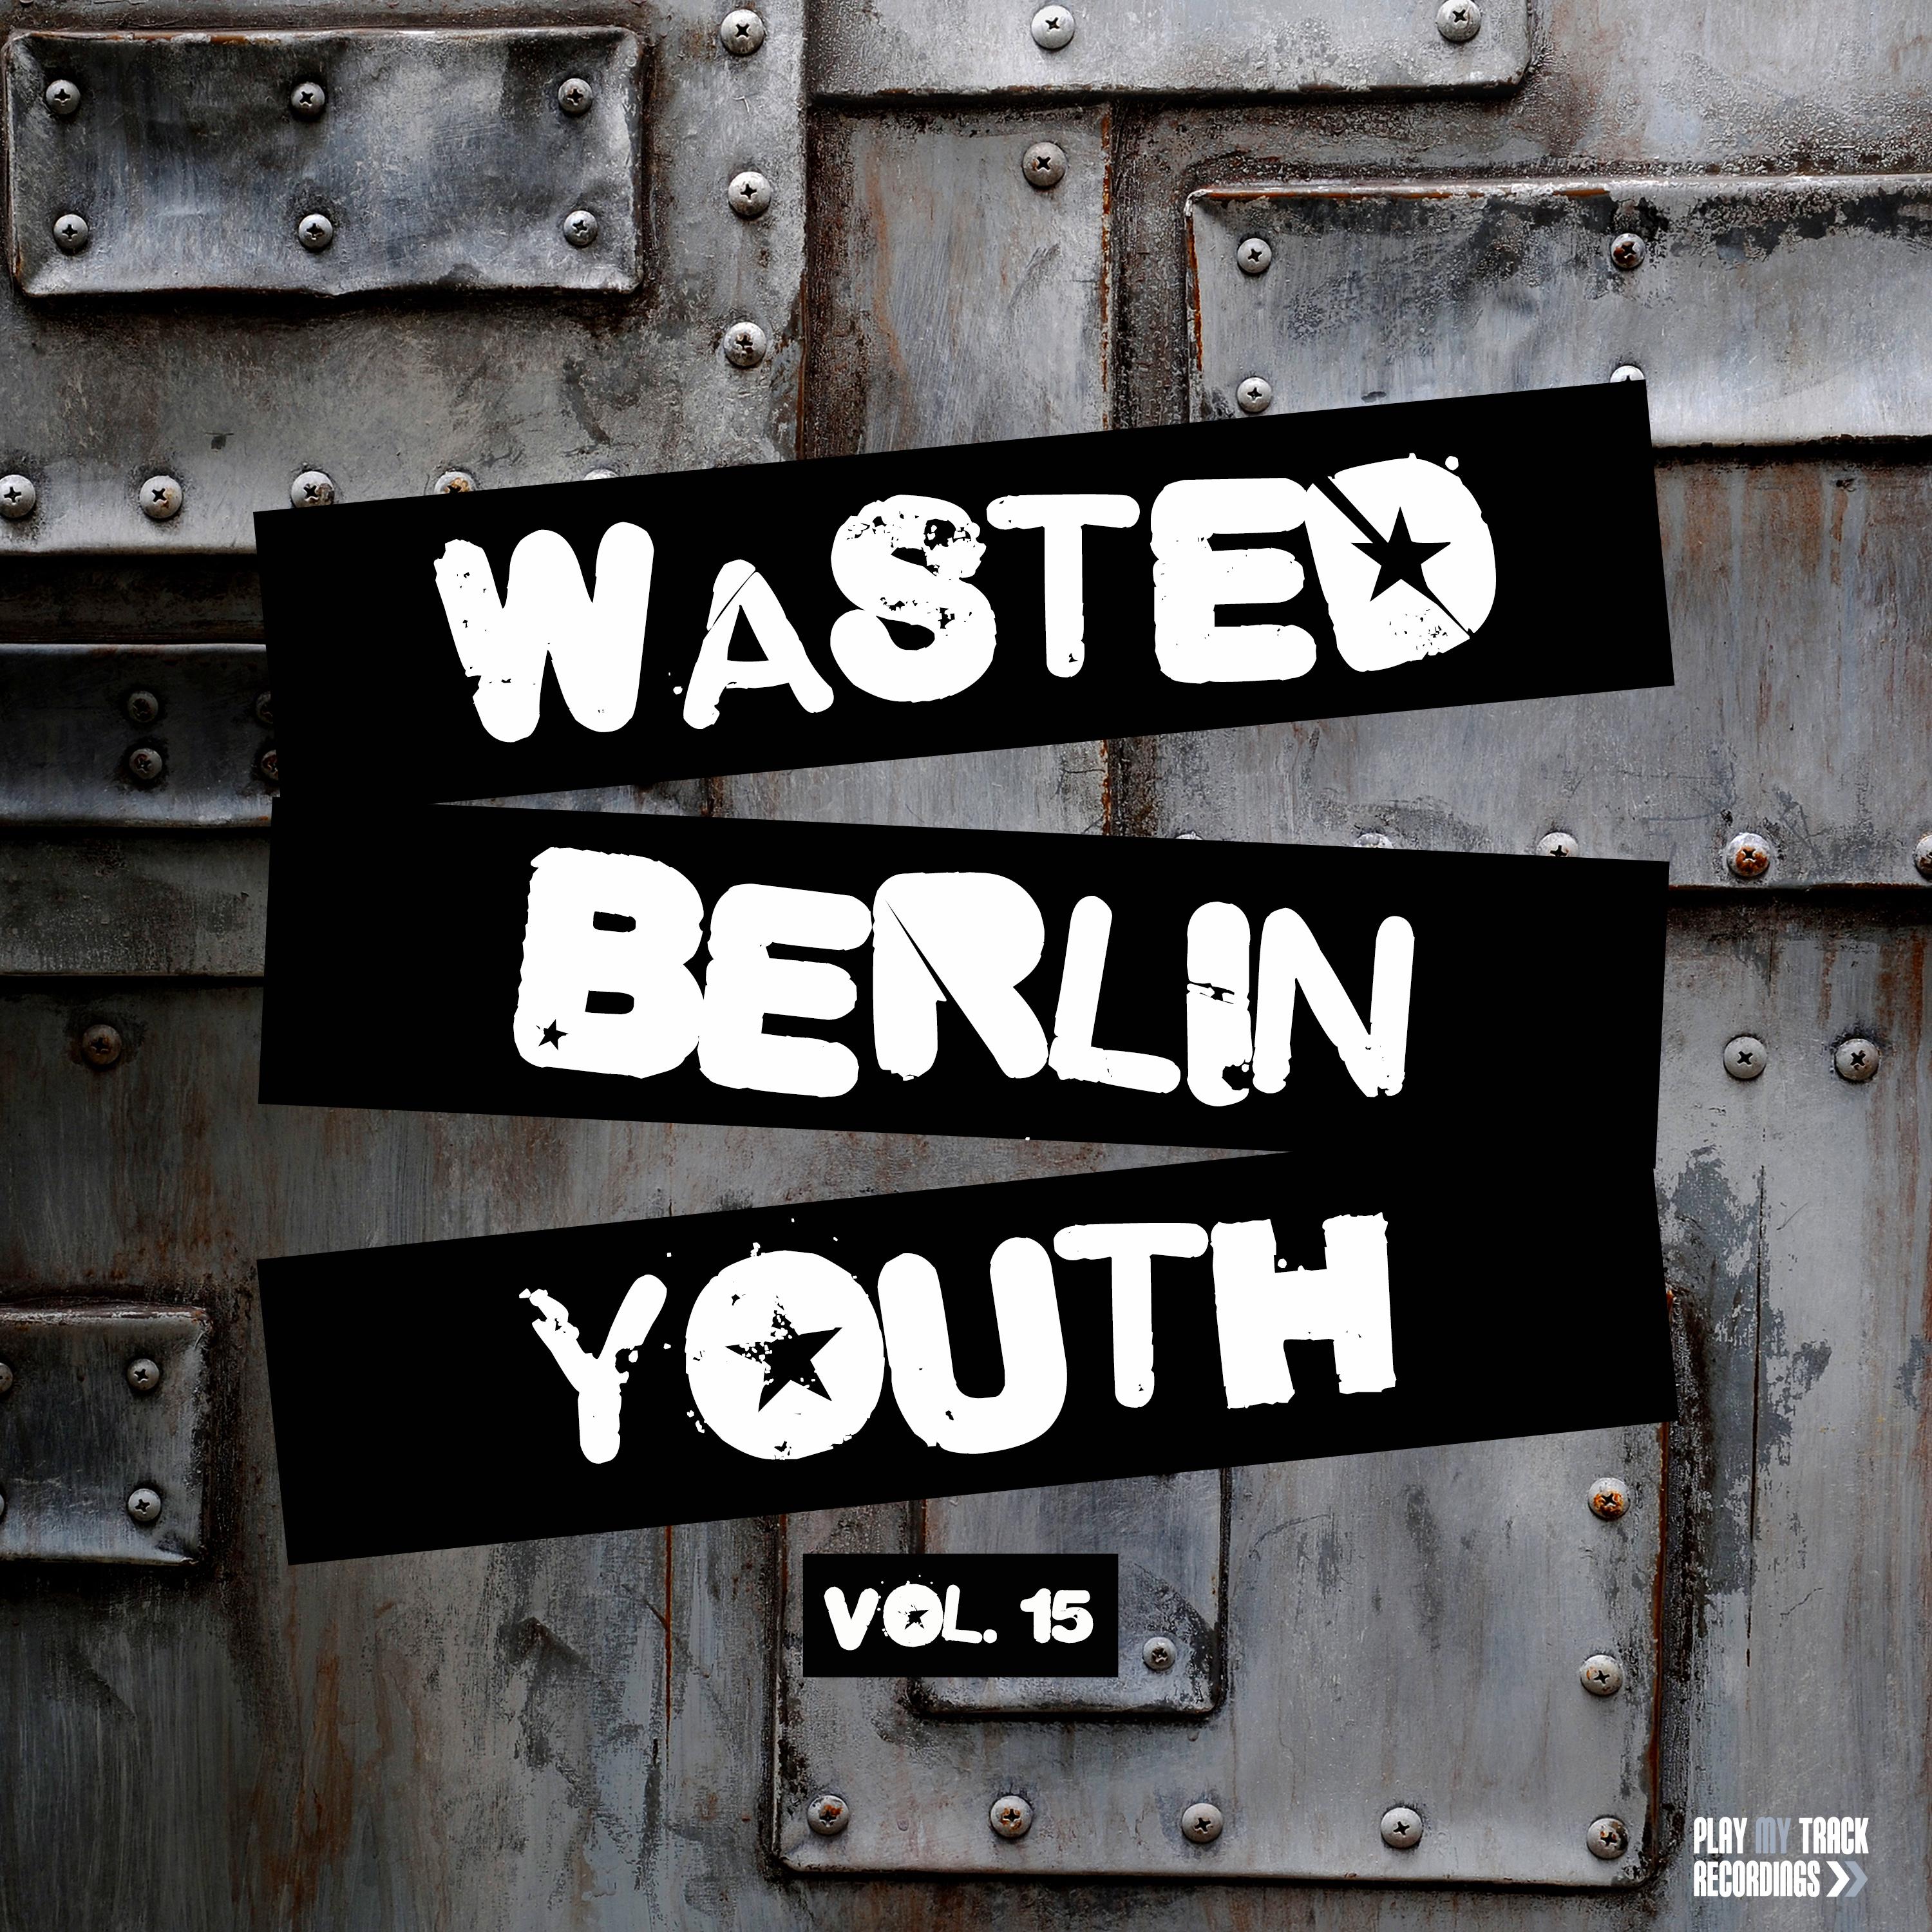 Wasted Berlin Youth, Vol. 15